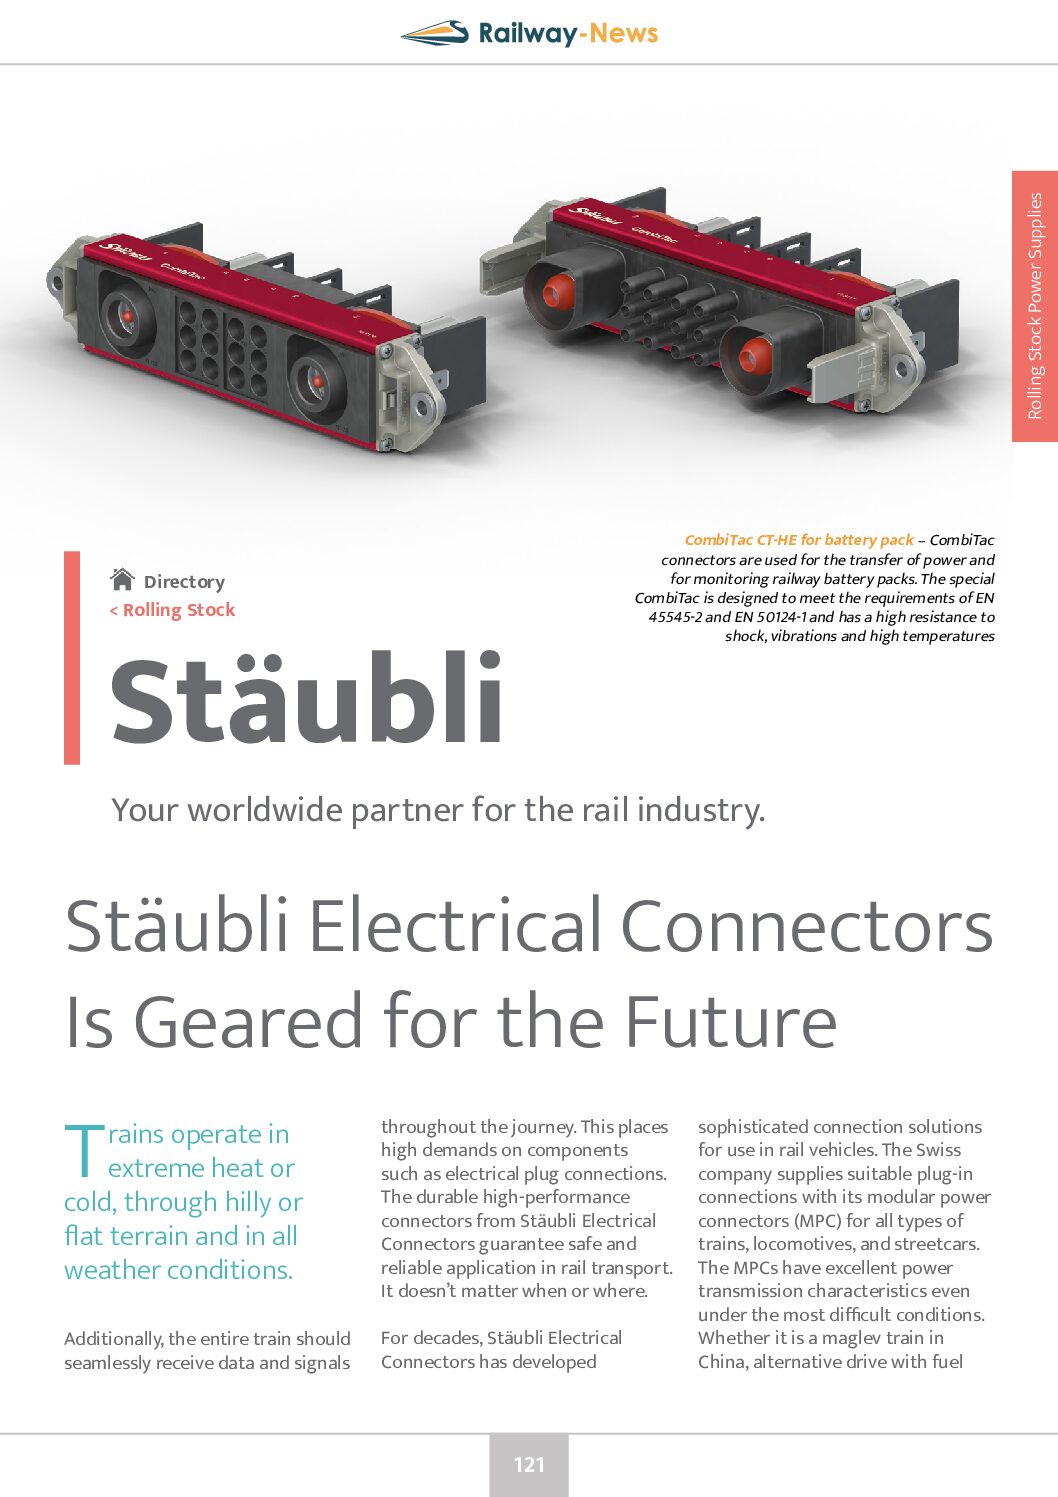 Stäubli Electrical Connectors Is Geared for the Future